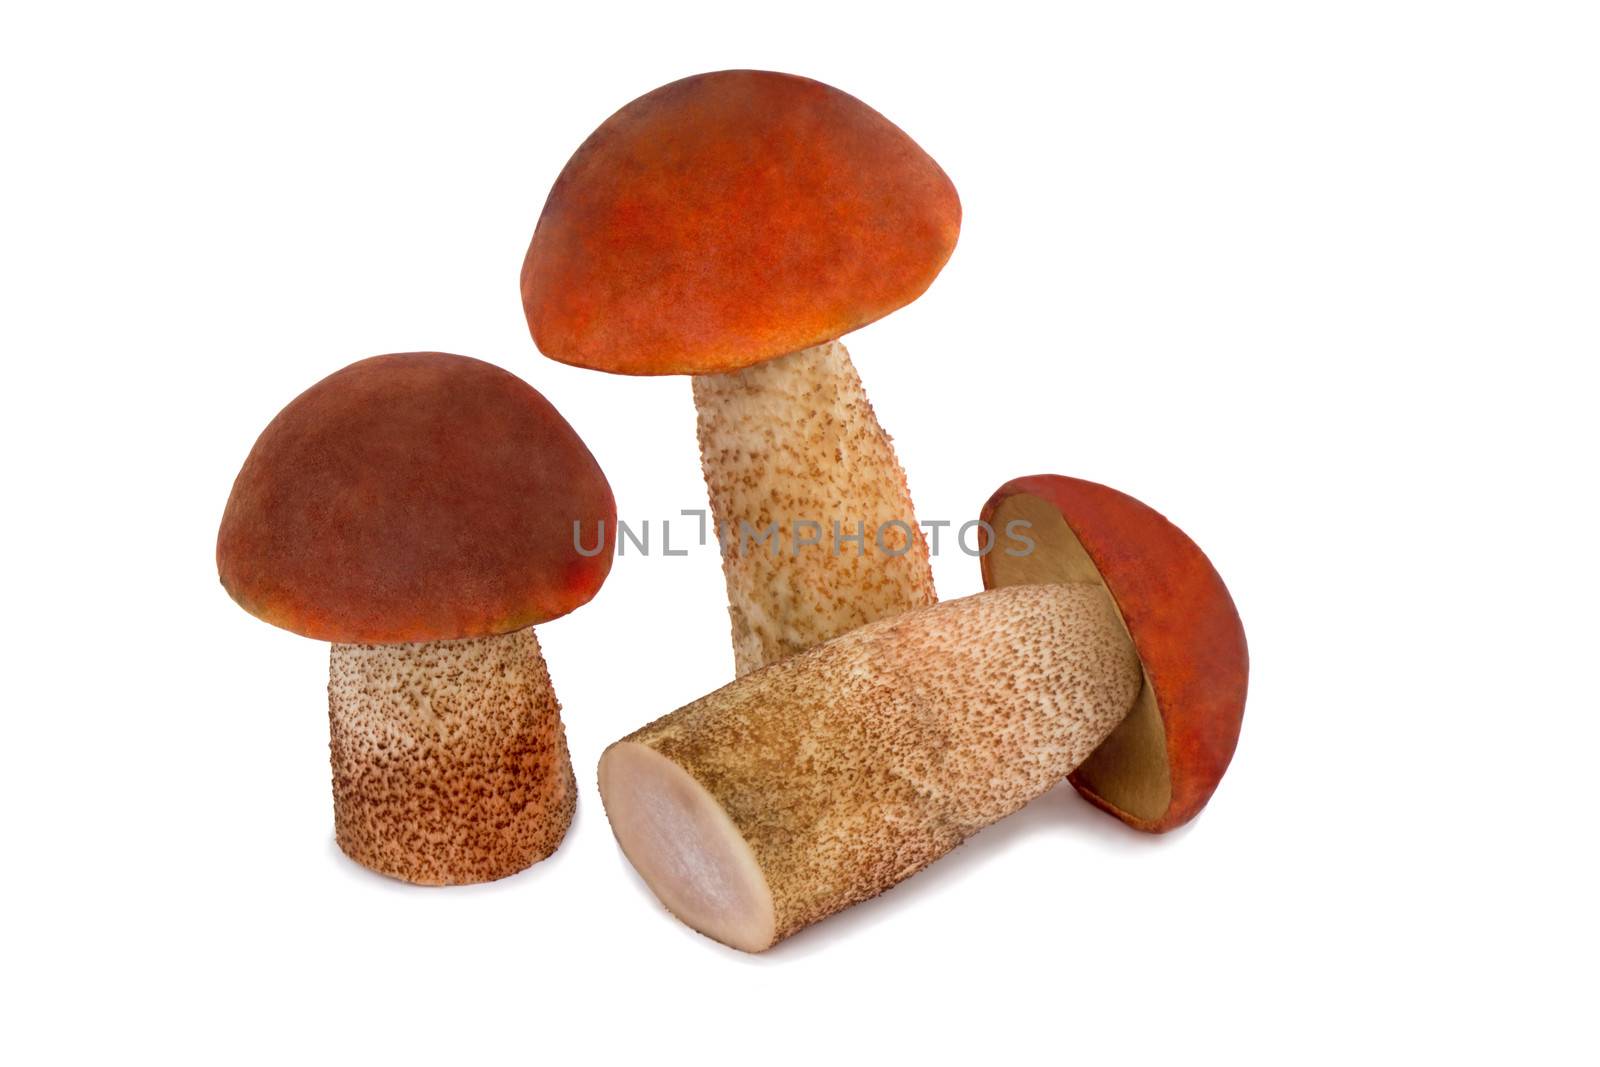 Beautiful mushrooms, aspen mushrooms with red hats. Presented on a white background.